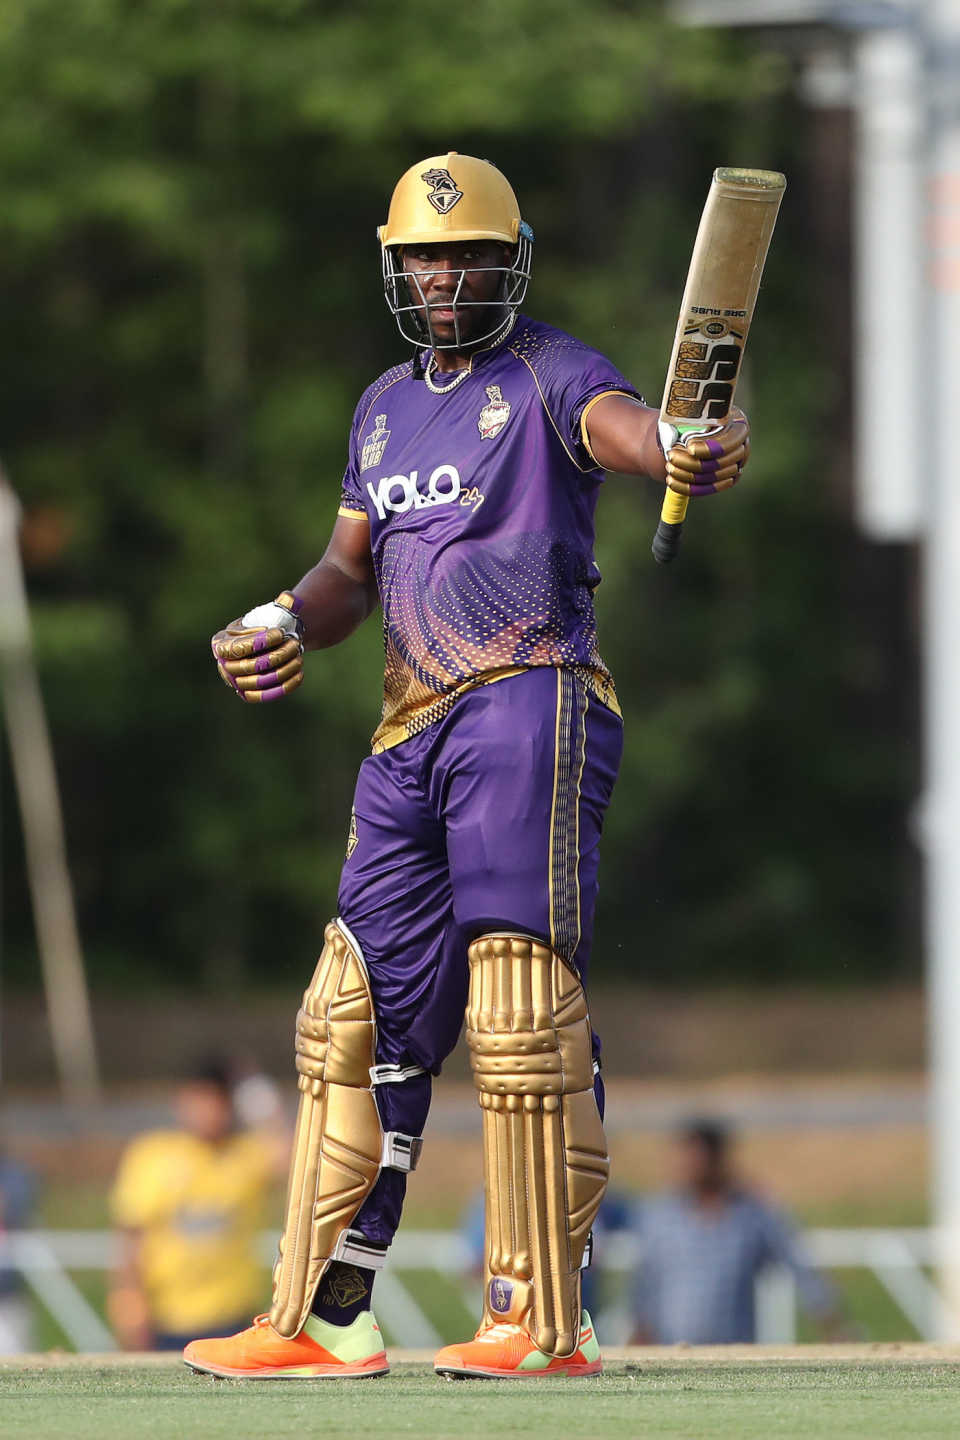 Andre Russell smashed 70 not out from just 37 balls, Los Angeles Knight Riders vs Washington Freedom, Major League Cricket, Morrisville, July 20, 2023